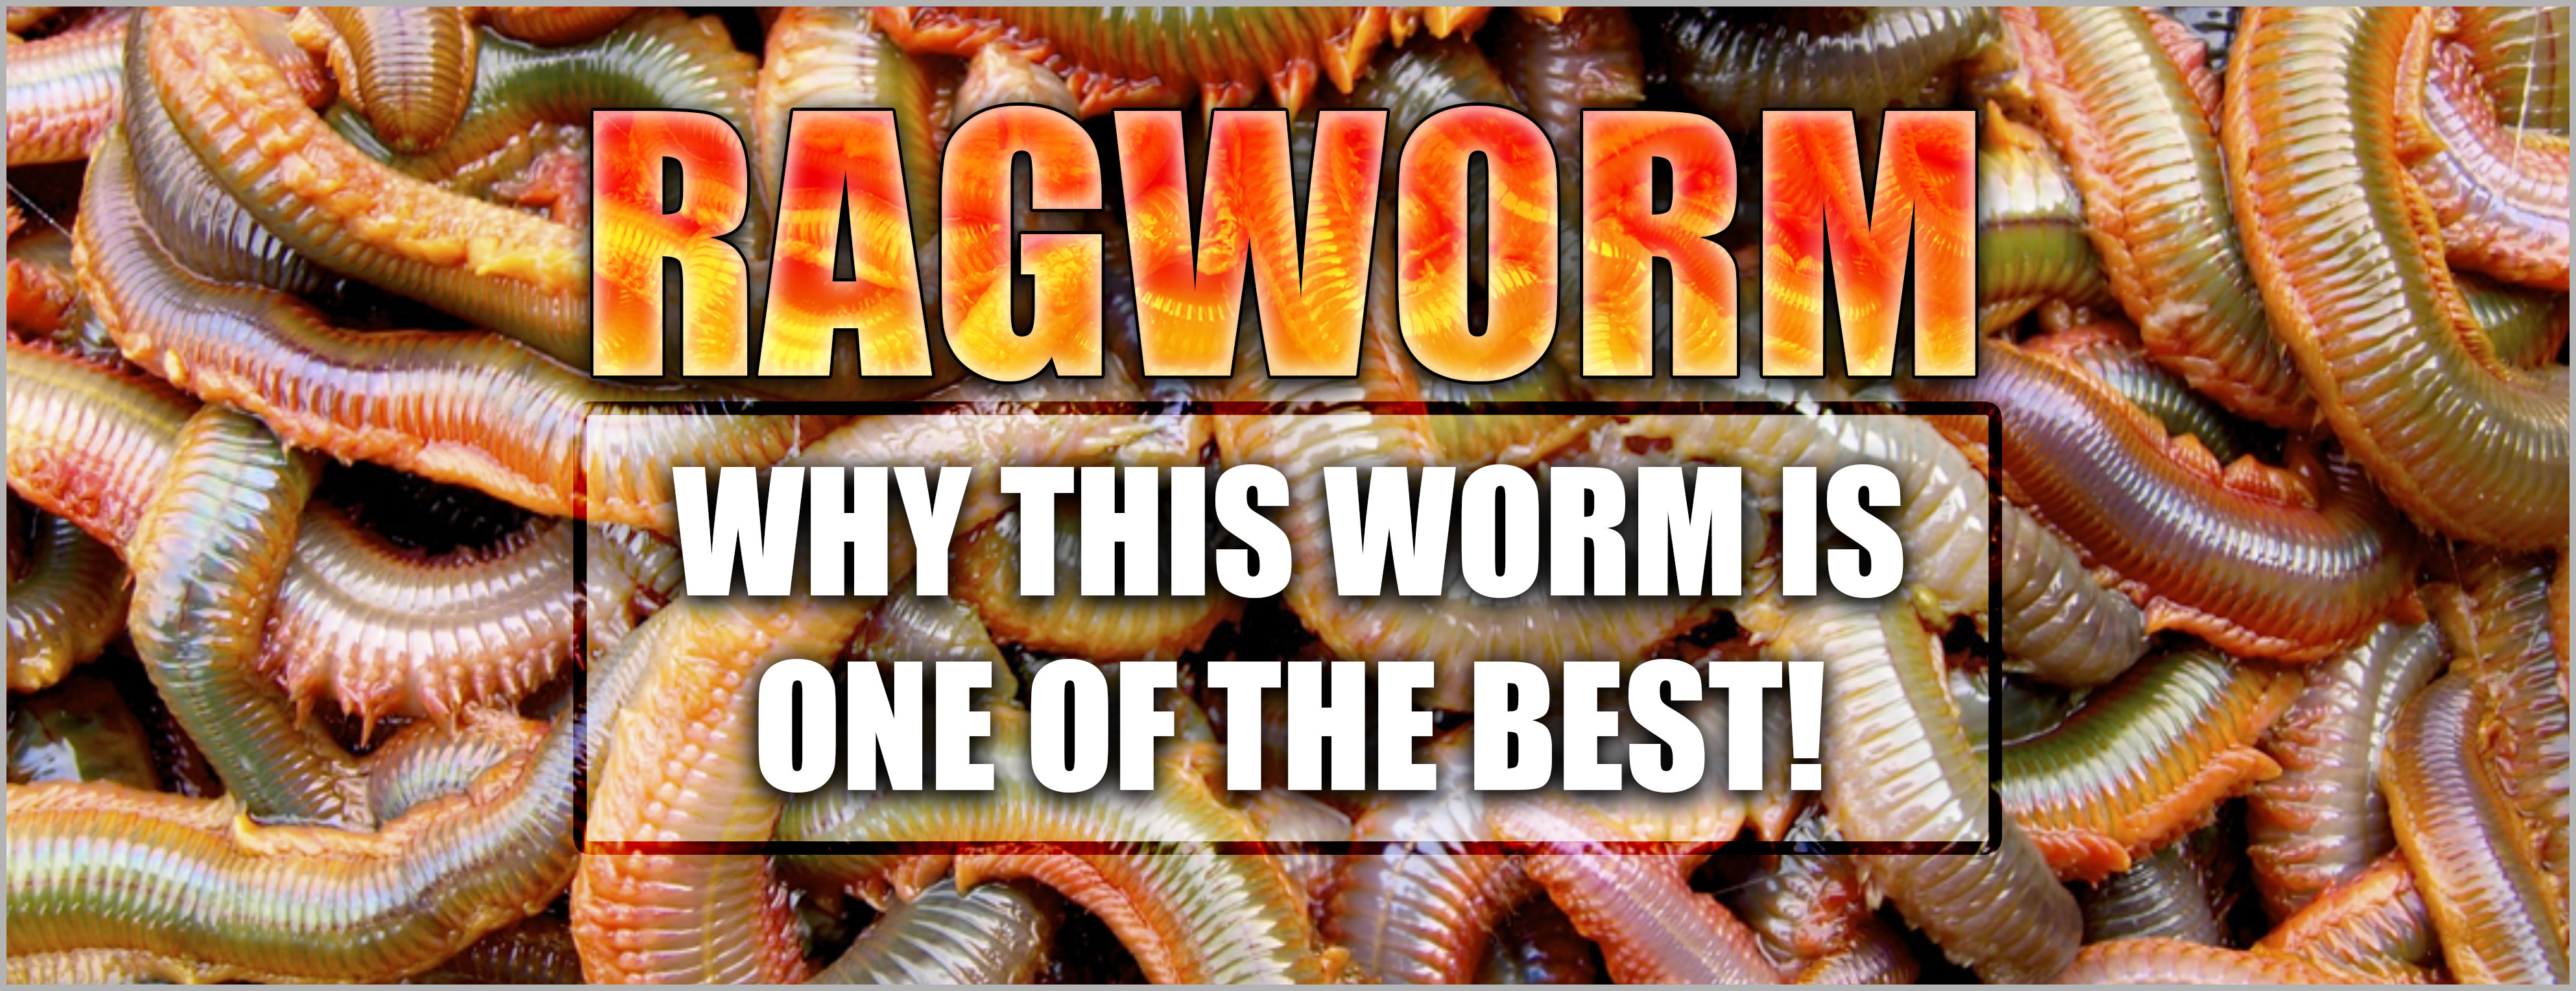 Ragworm! Why this worm is one of the best